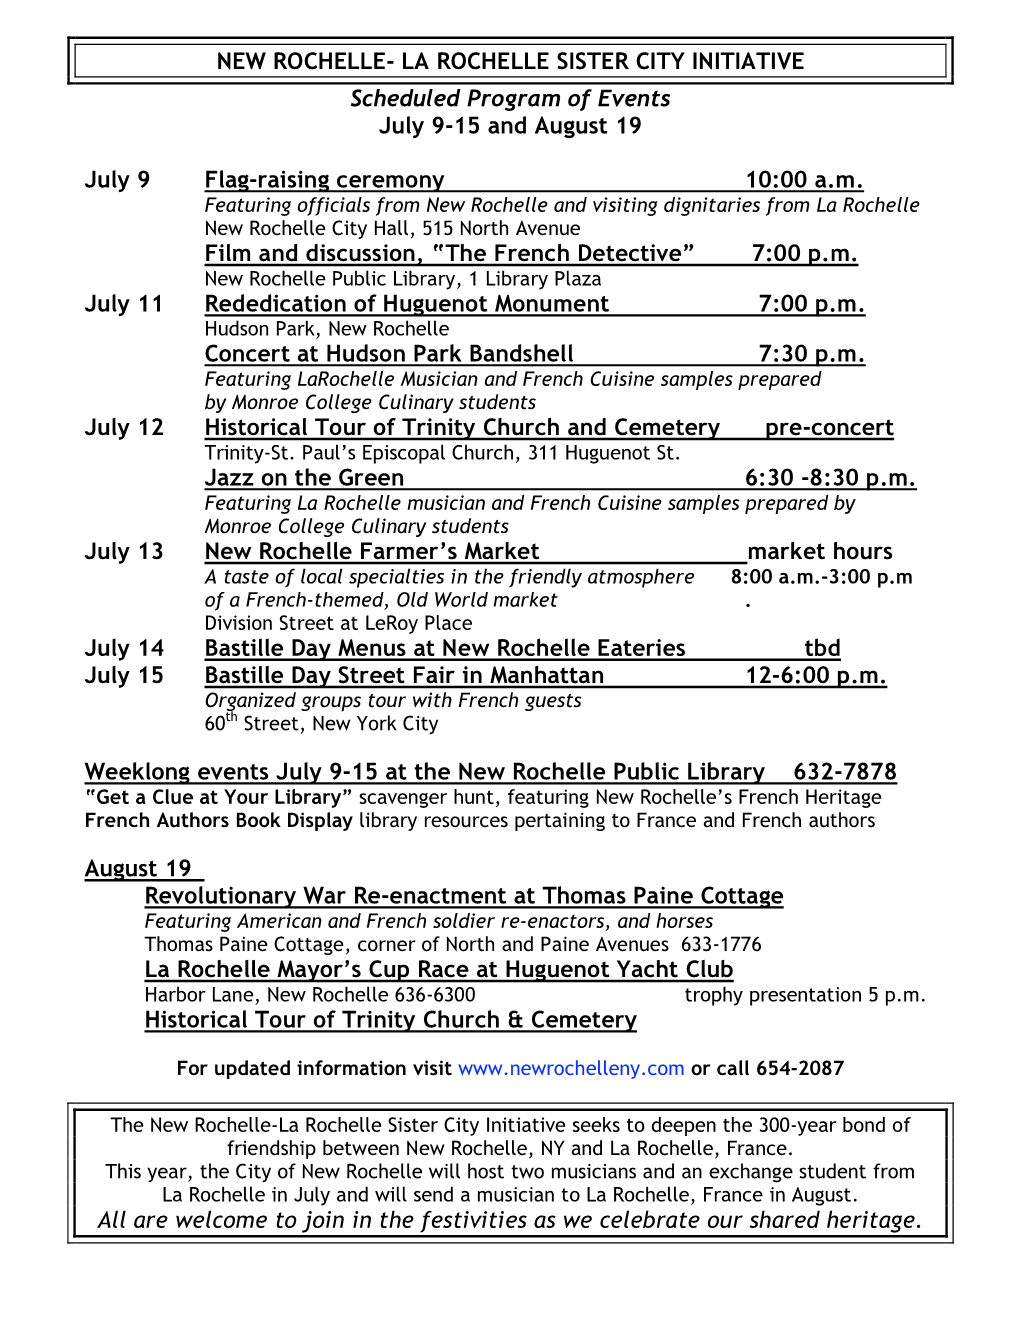 LA ROCHELLE SISTER CITY INITIATIVE Scheduled Program of Events July 9-15 and August 19